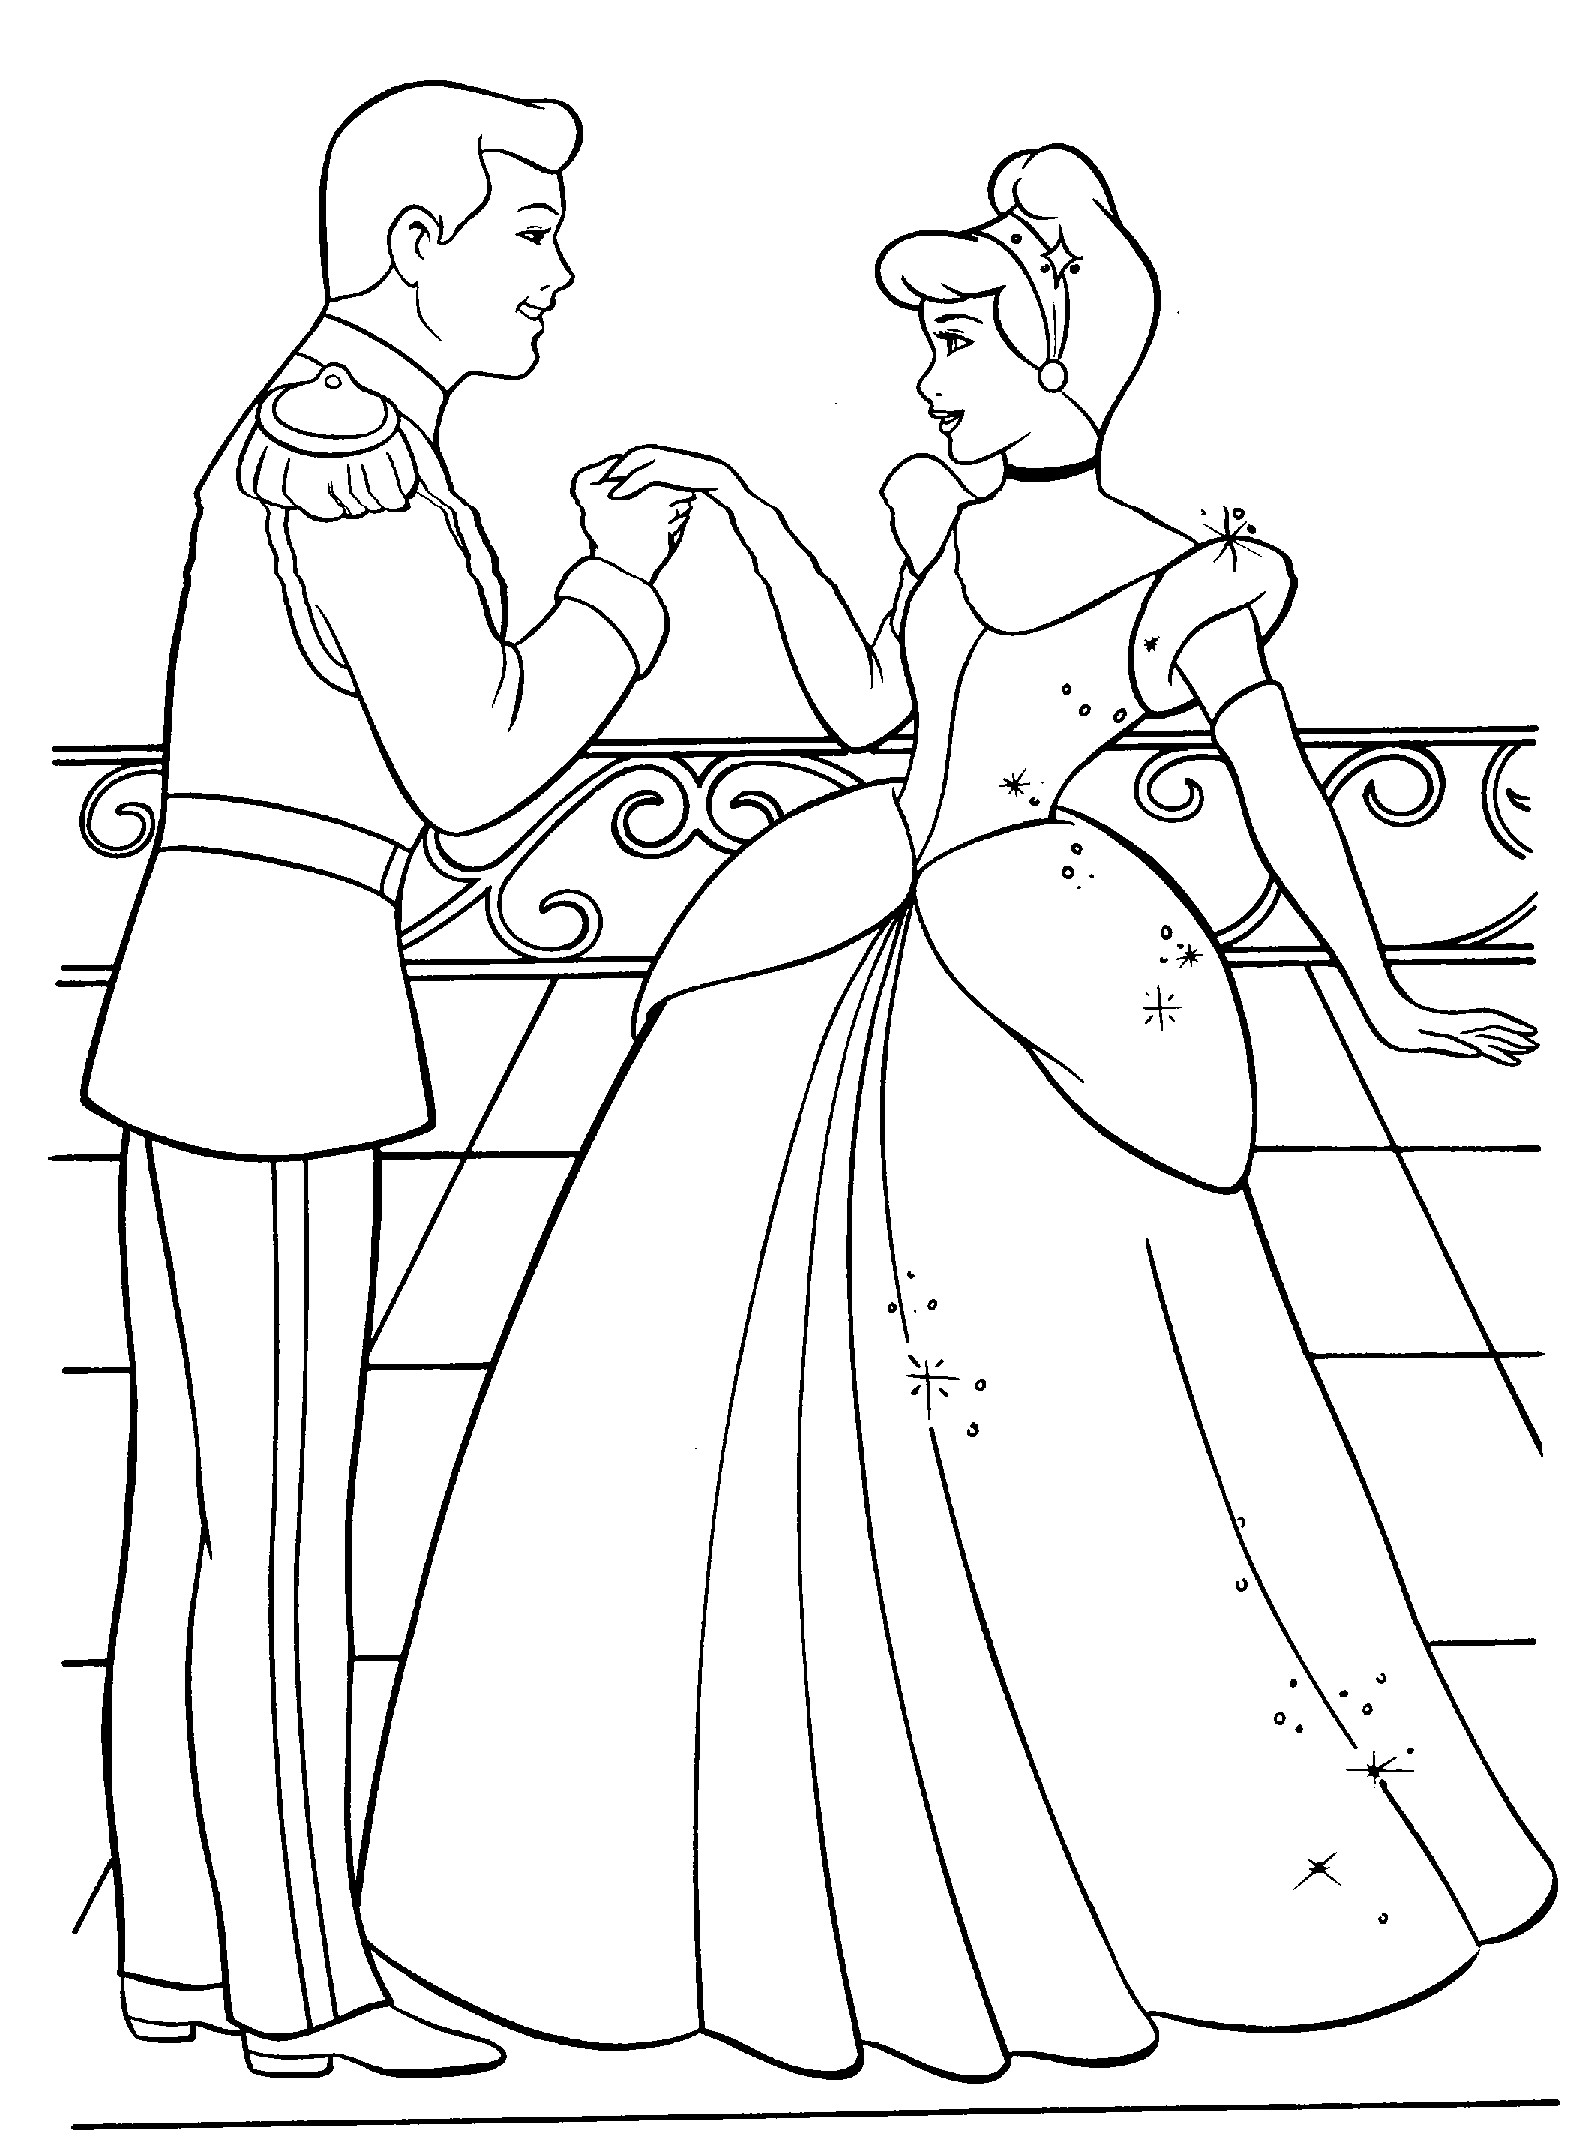 Free Printable Toddler Coloring Pages
 Free Printable Cinderella Activity Sheets and Coloring